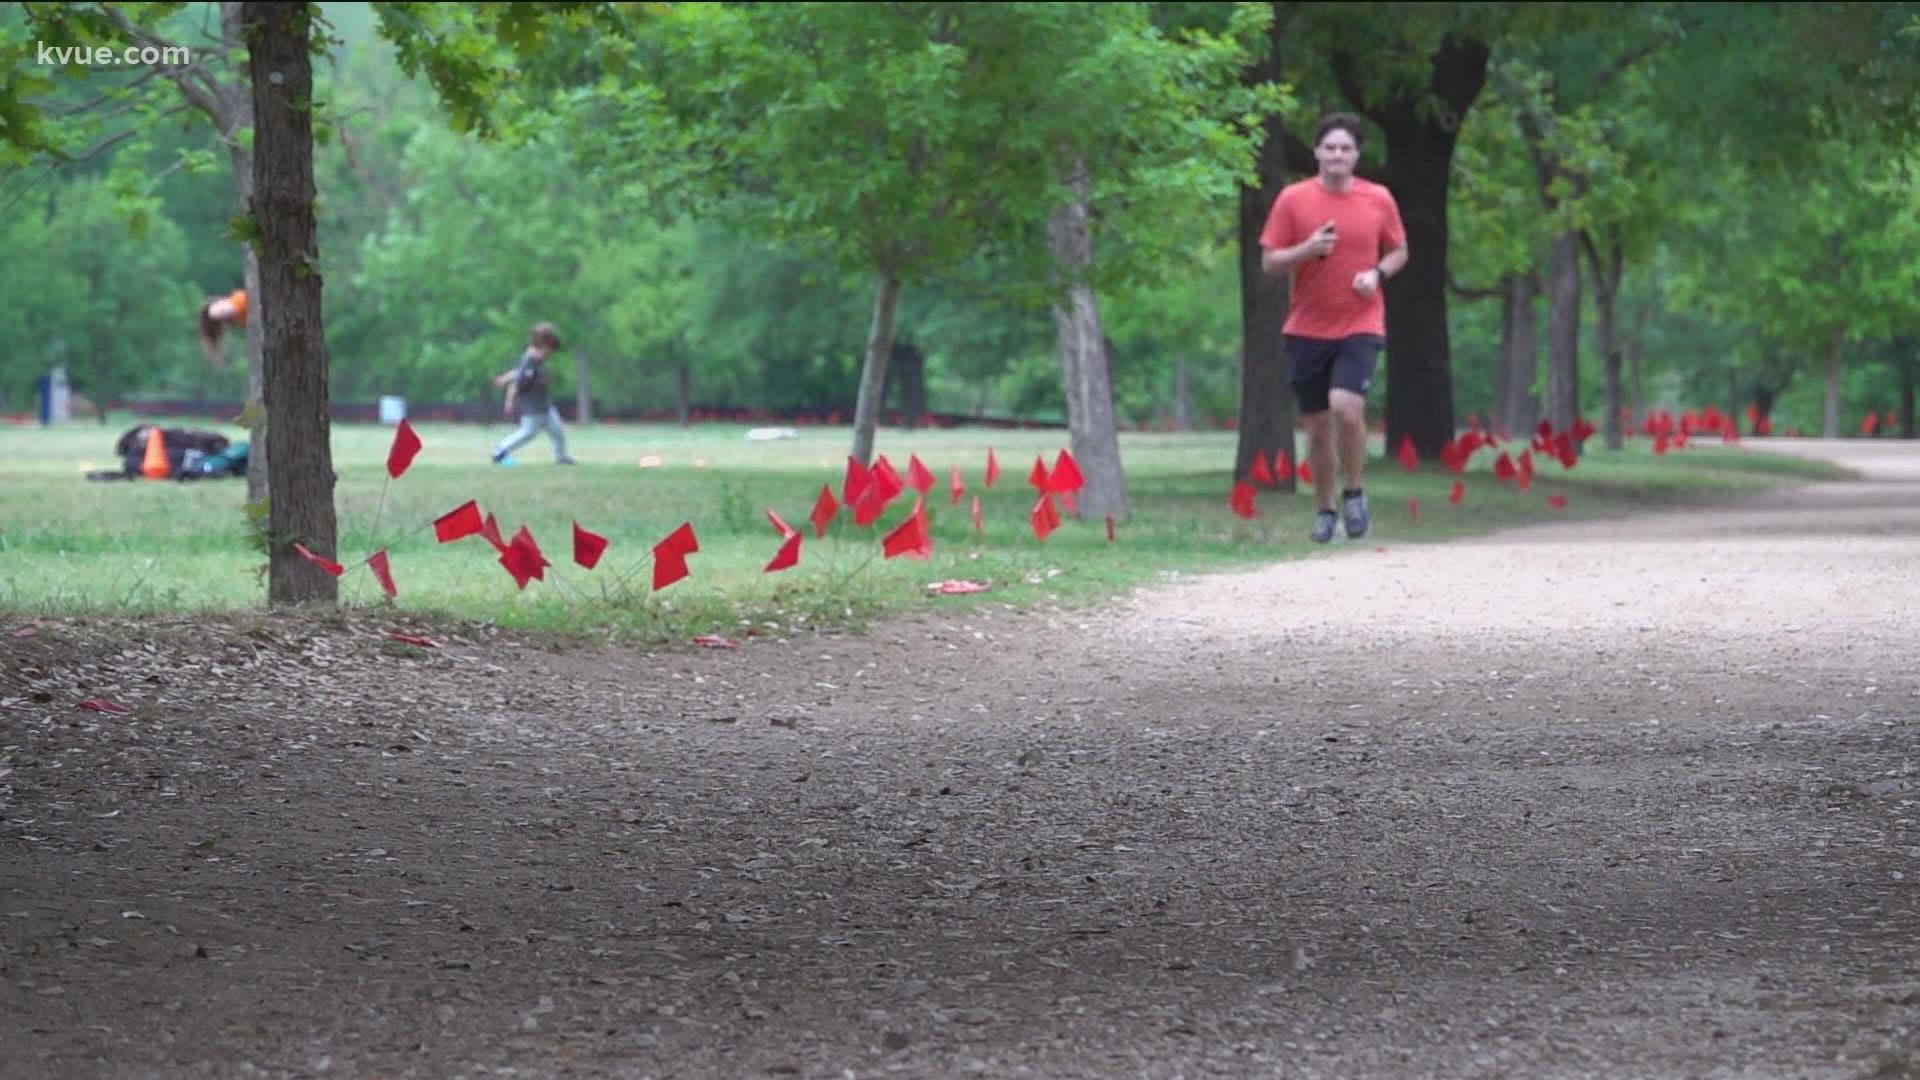 Red flags have been placed along a half-mile route at the park. They will be on display through Sunday.